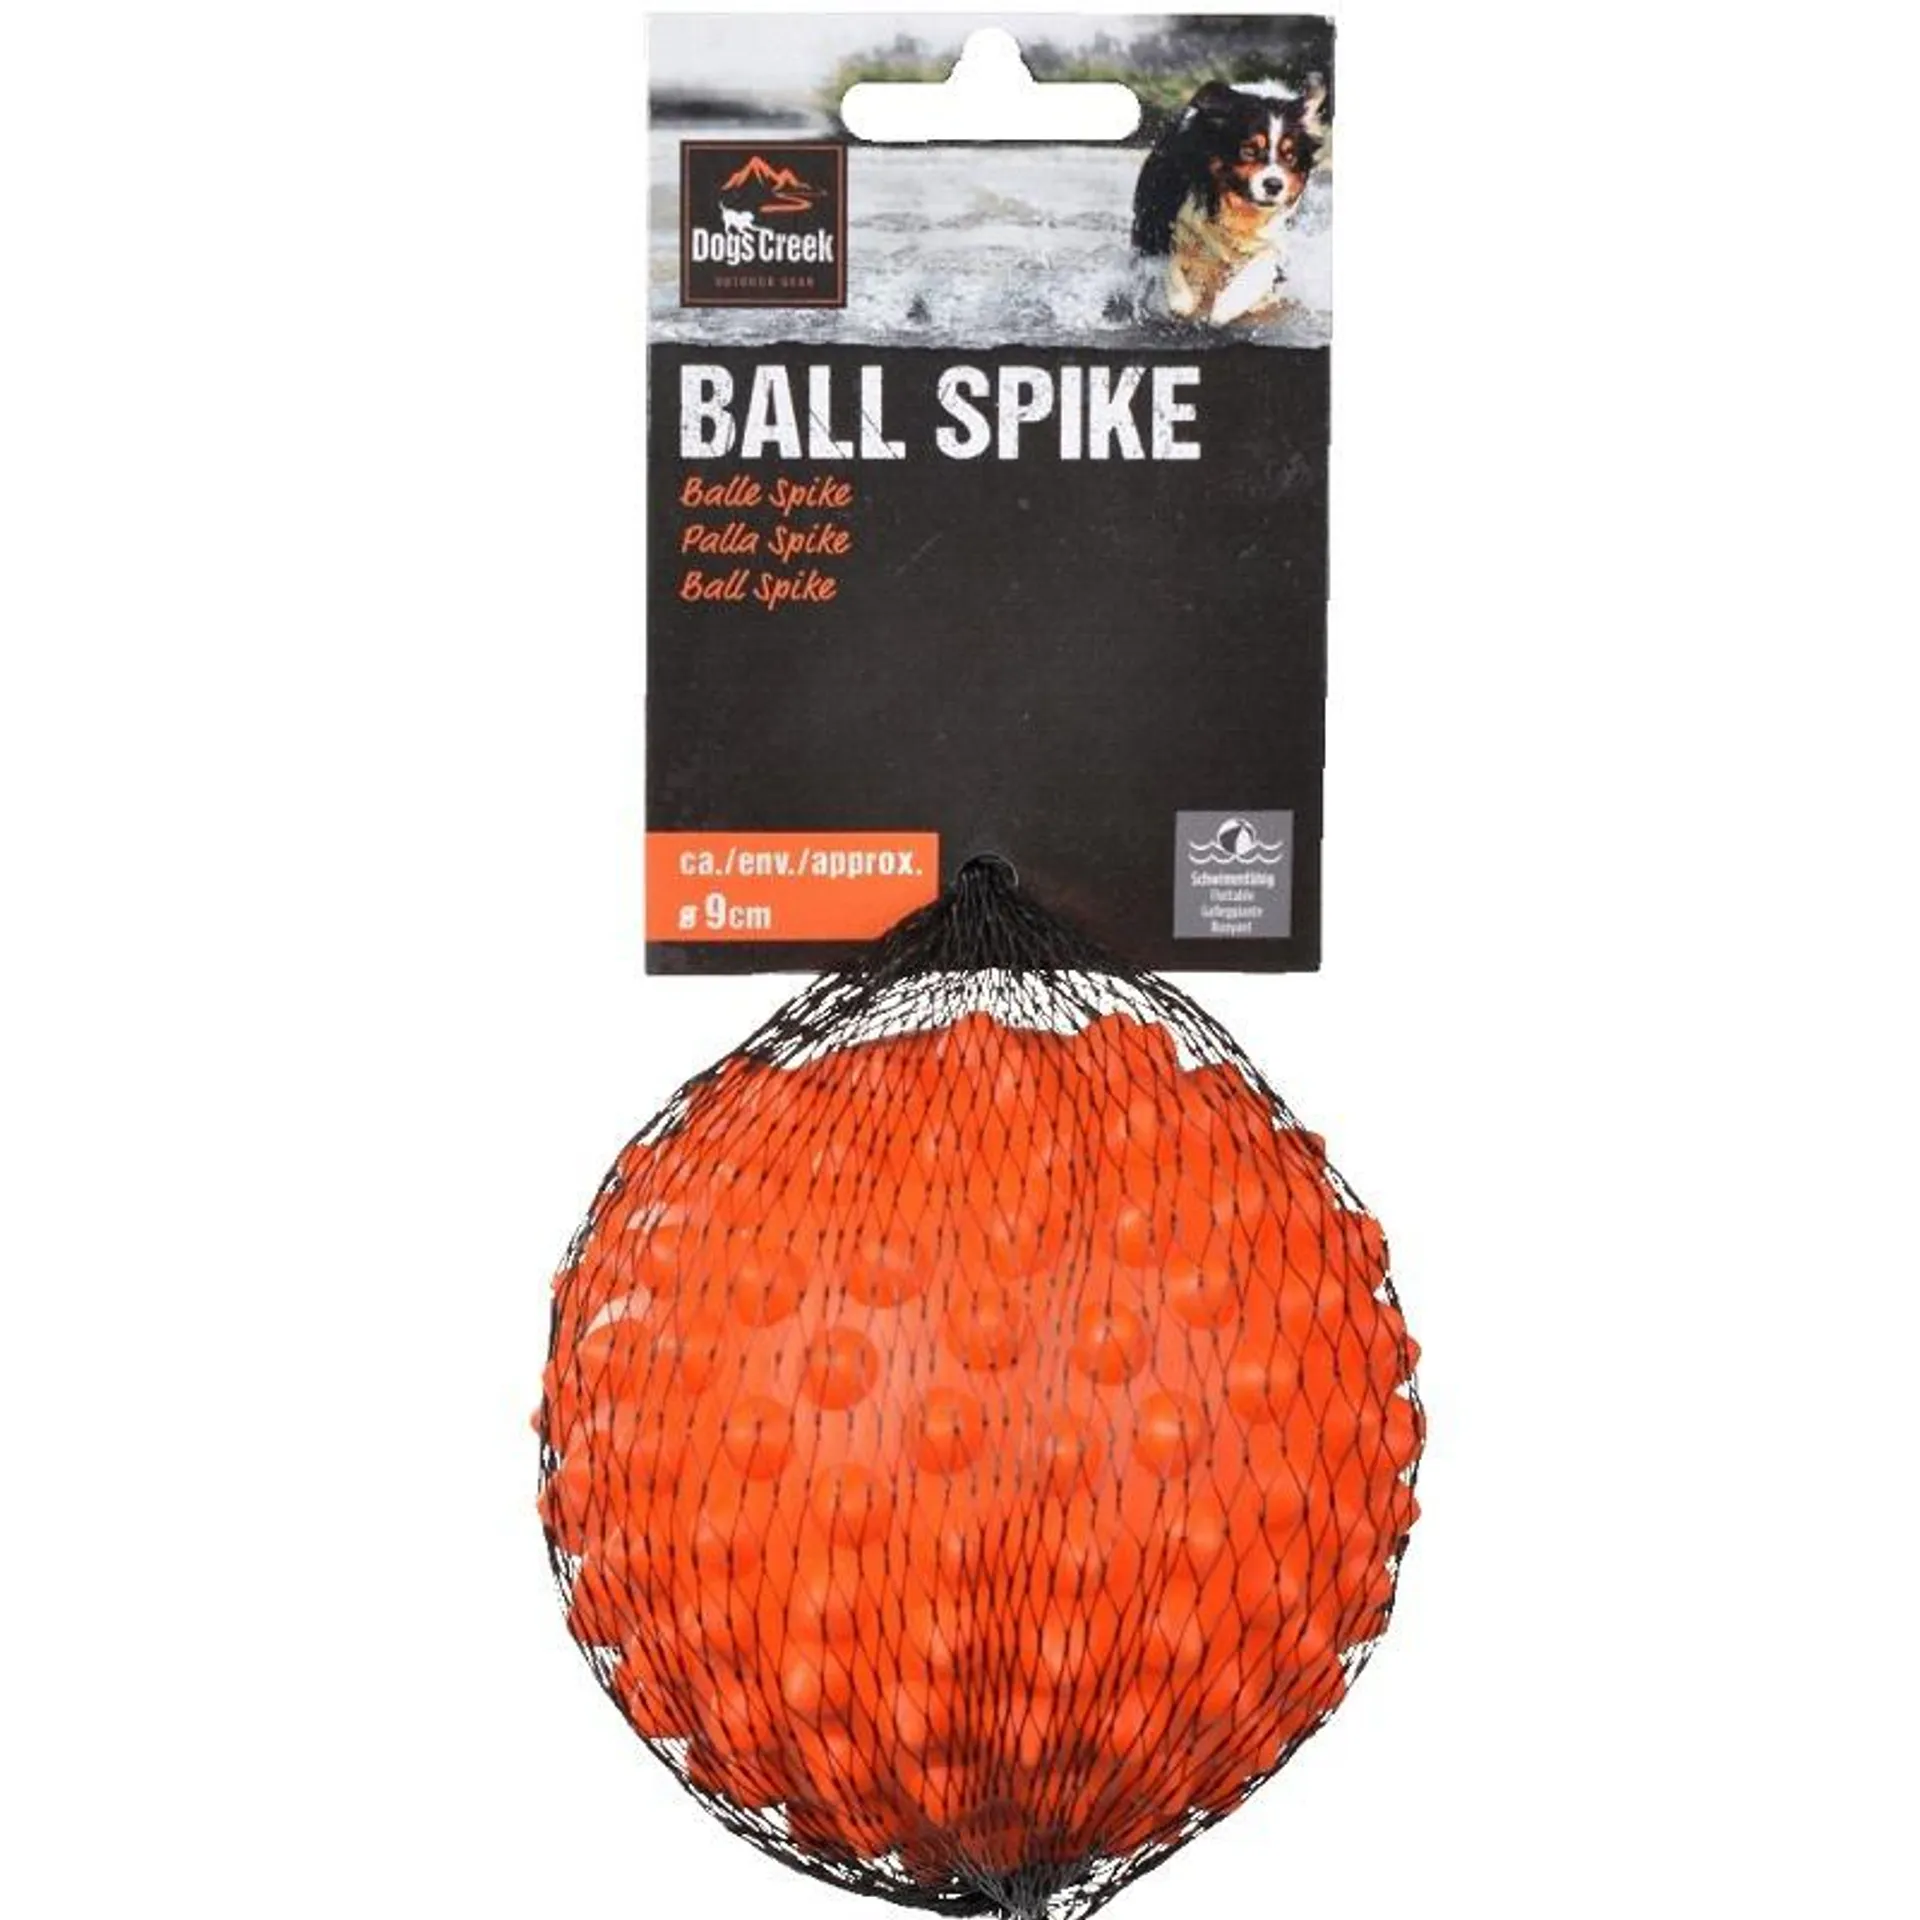 Dogs Creek Ball Spike Toy